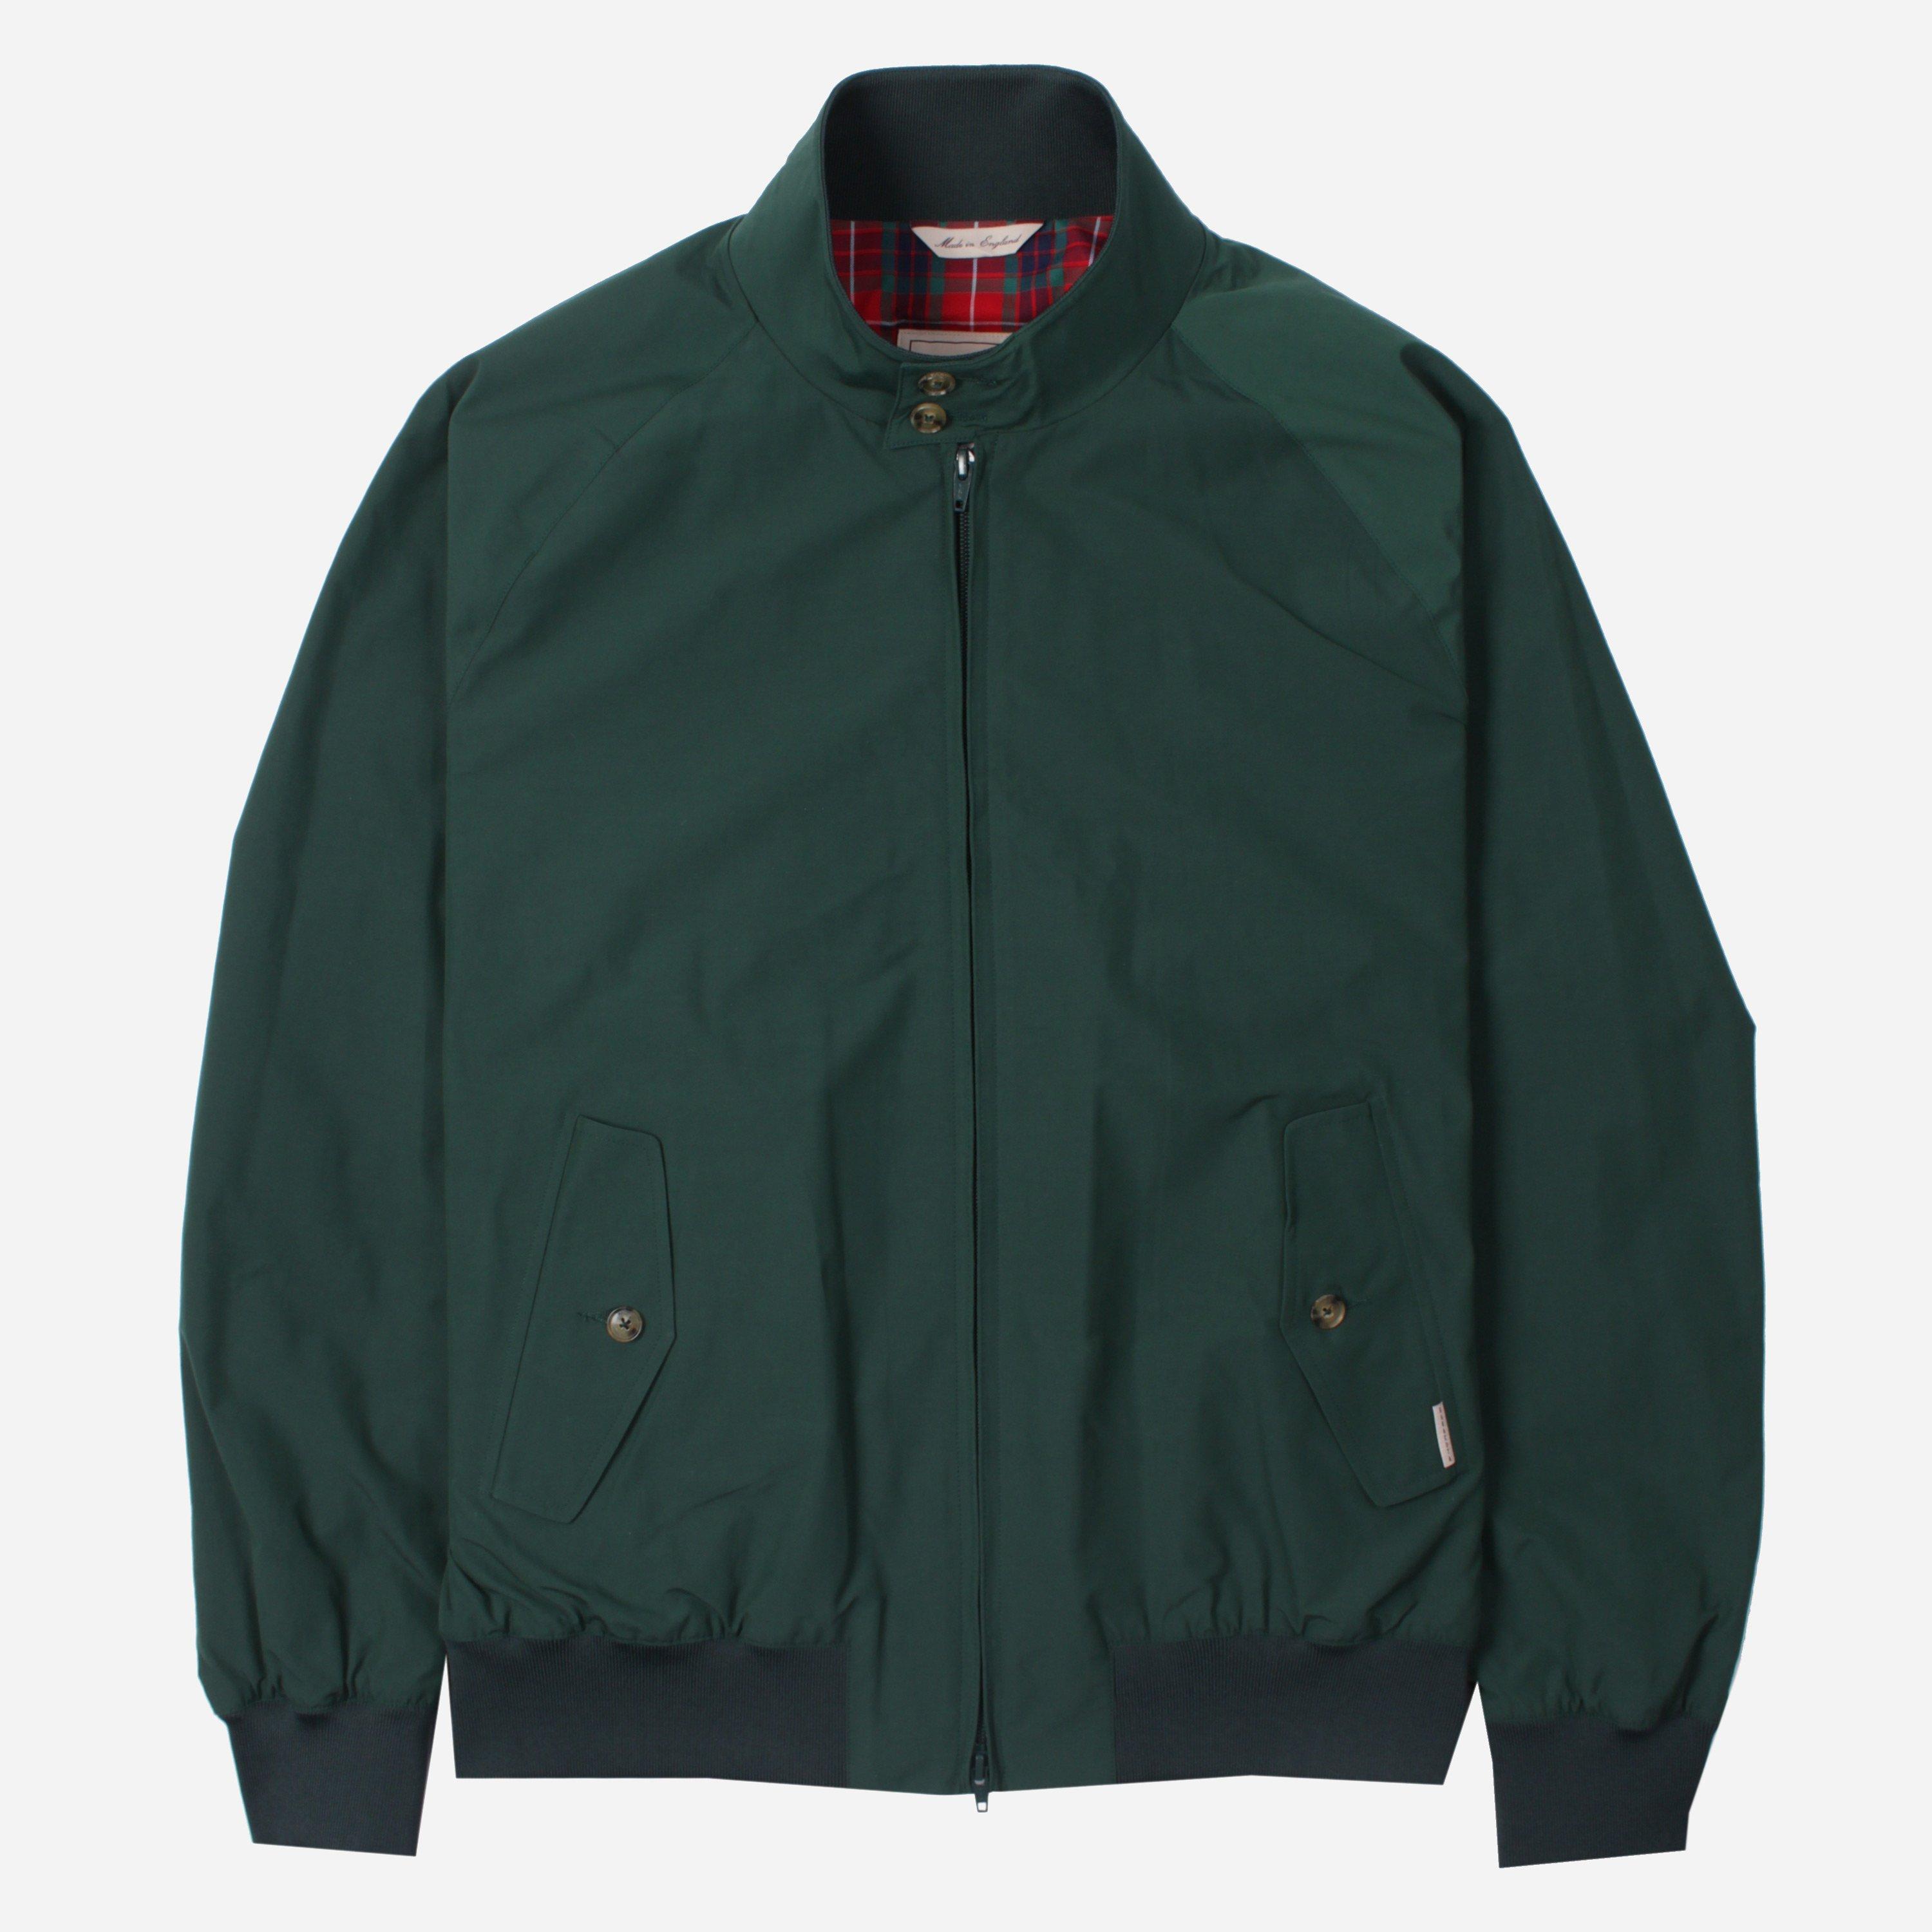 Baracuta Archive Authentic Fit Jacket in Green for Men - Lyst